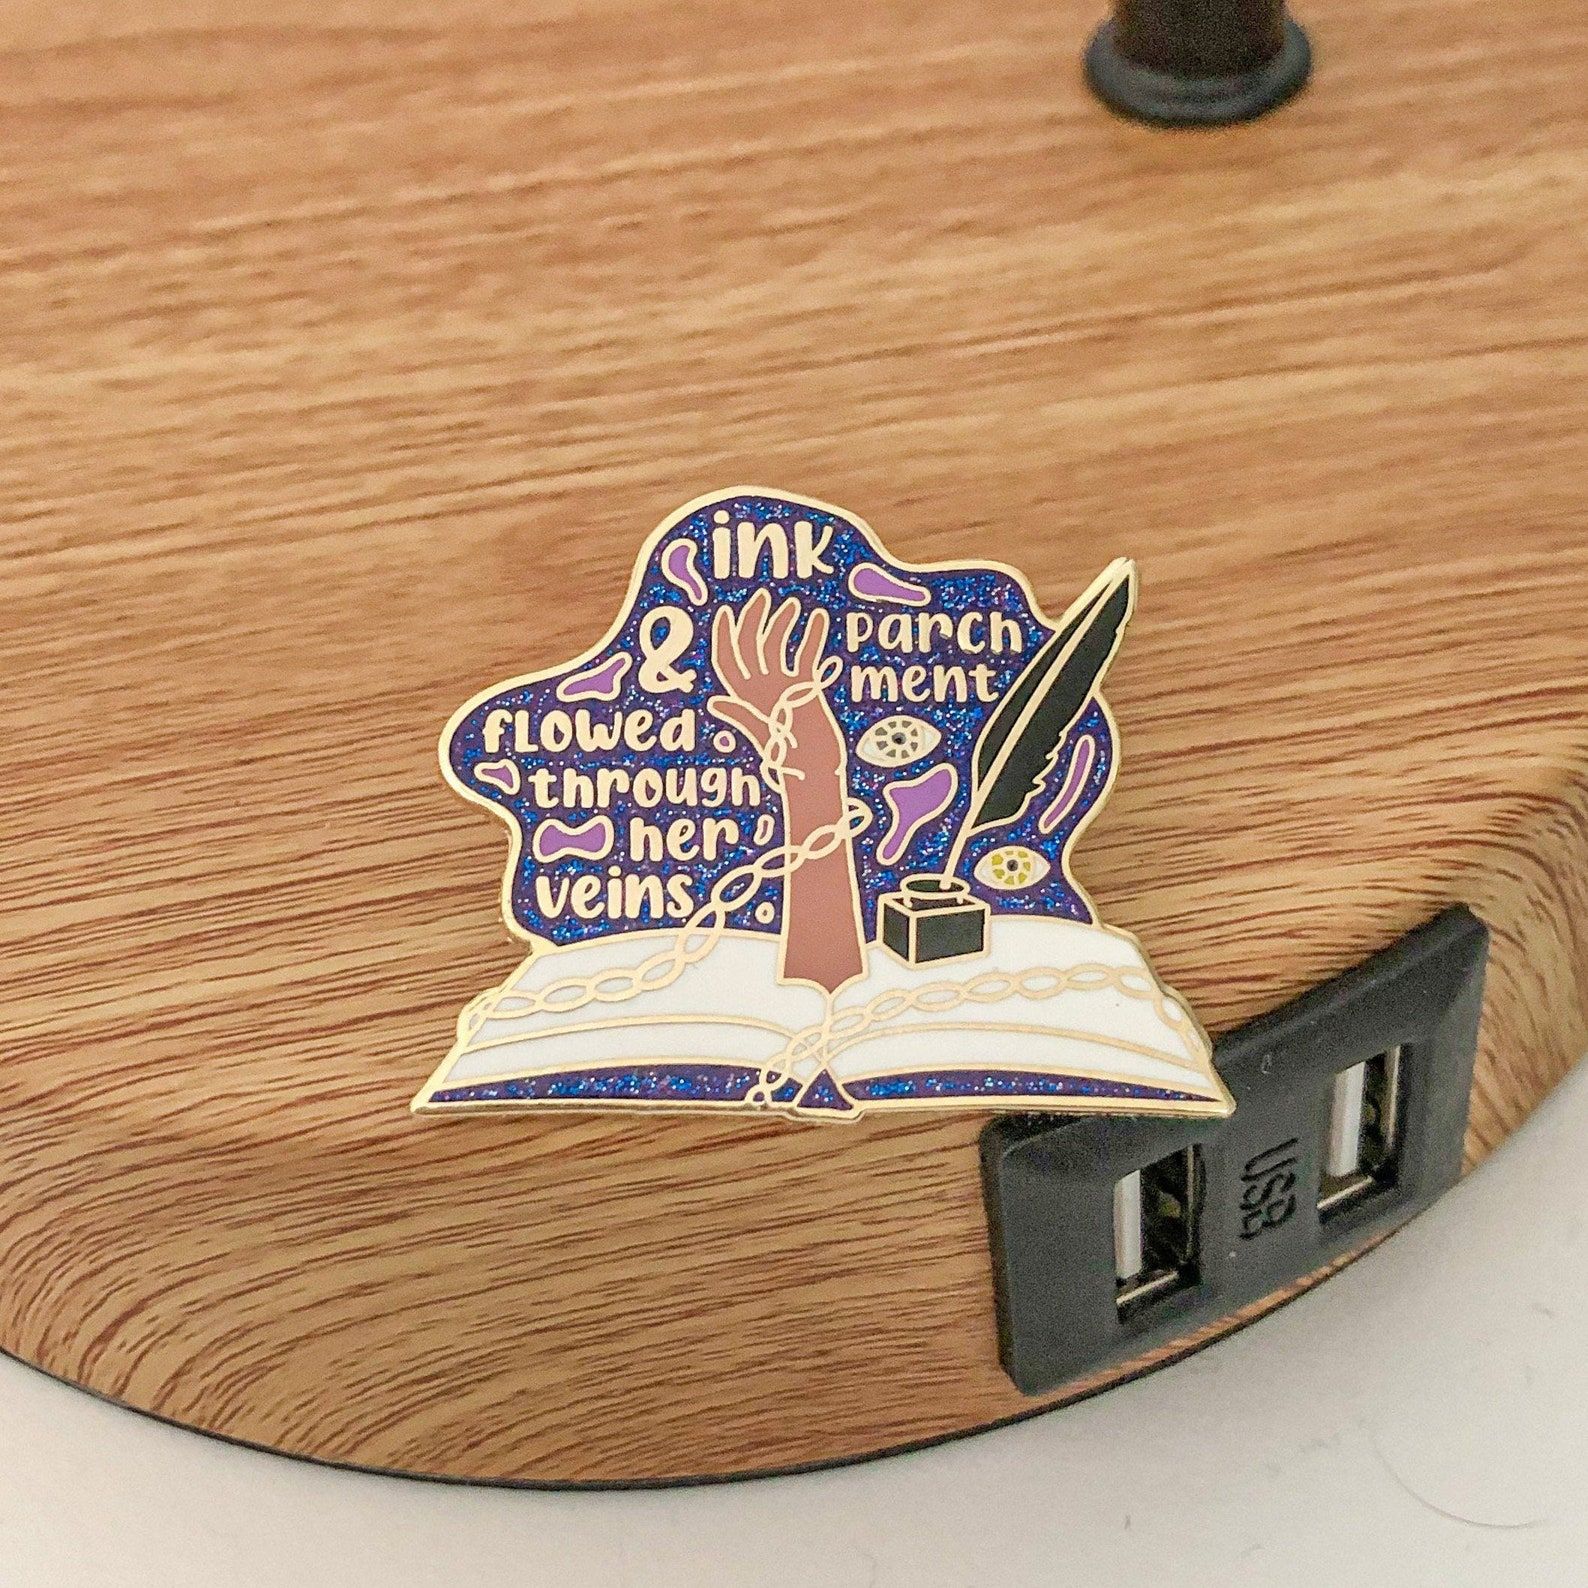 An enamel pin with a hand, quill pen and ink, and the words "ink and parchment flowed through her veins"